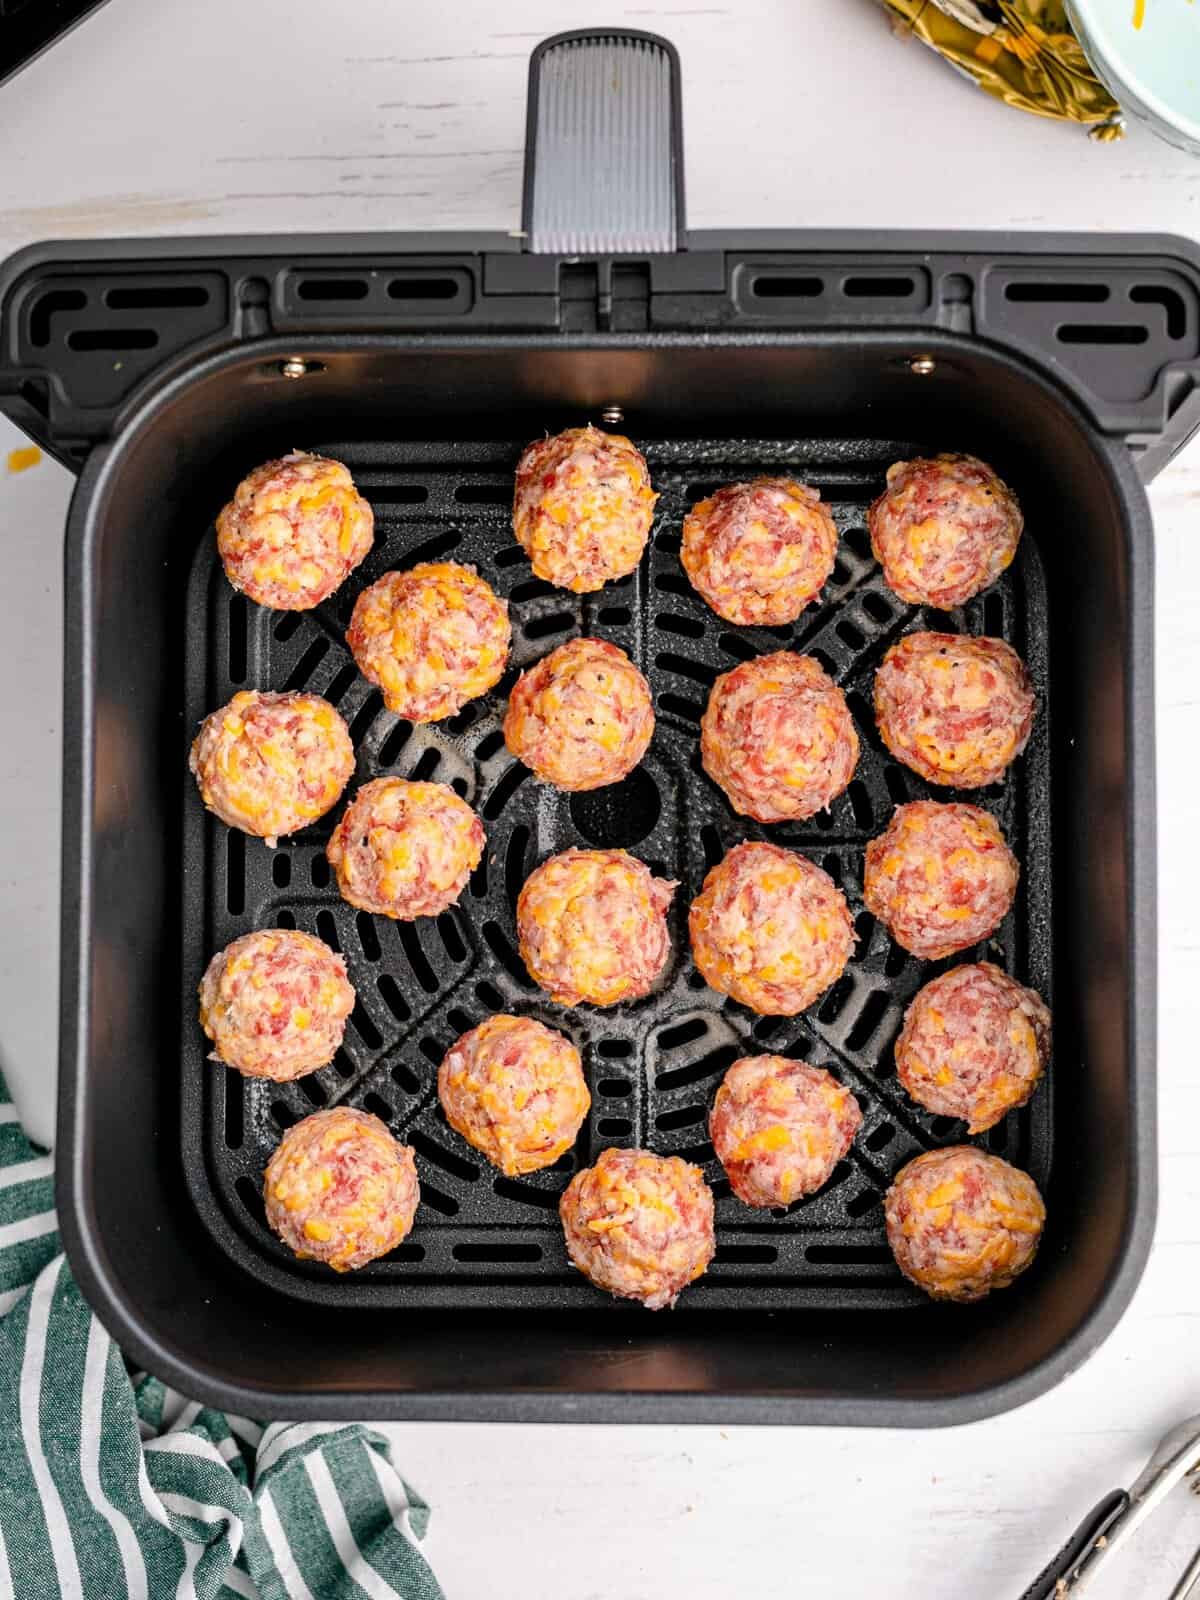 Rounded balls placed in air fryer basket.